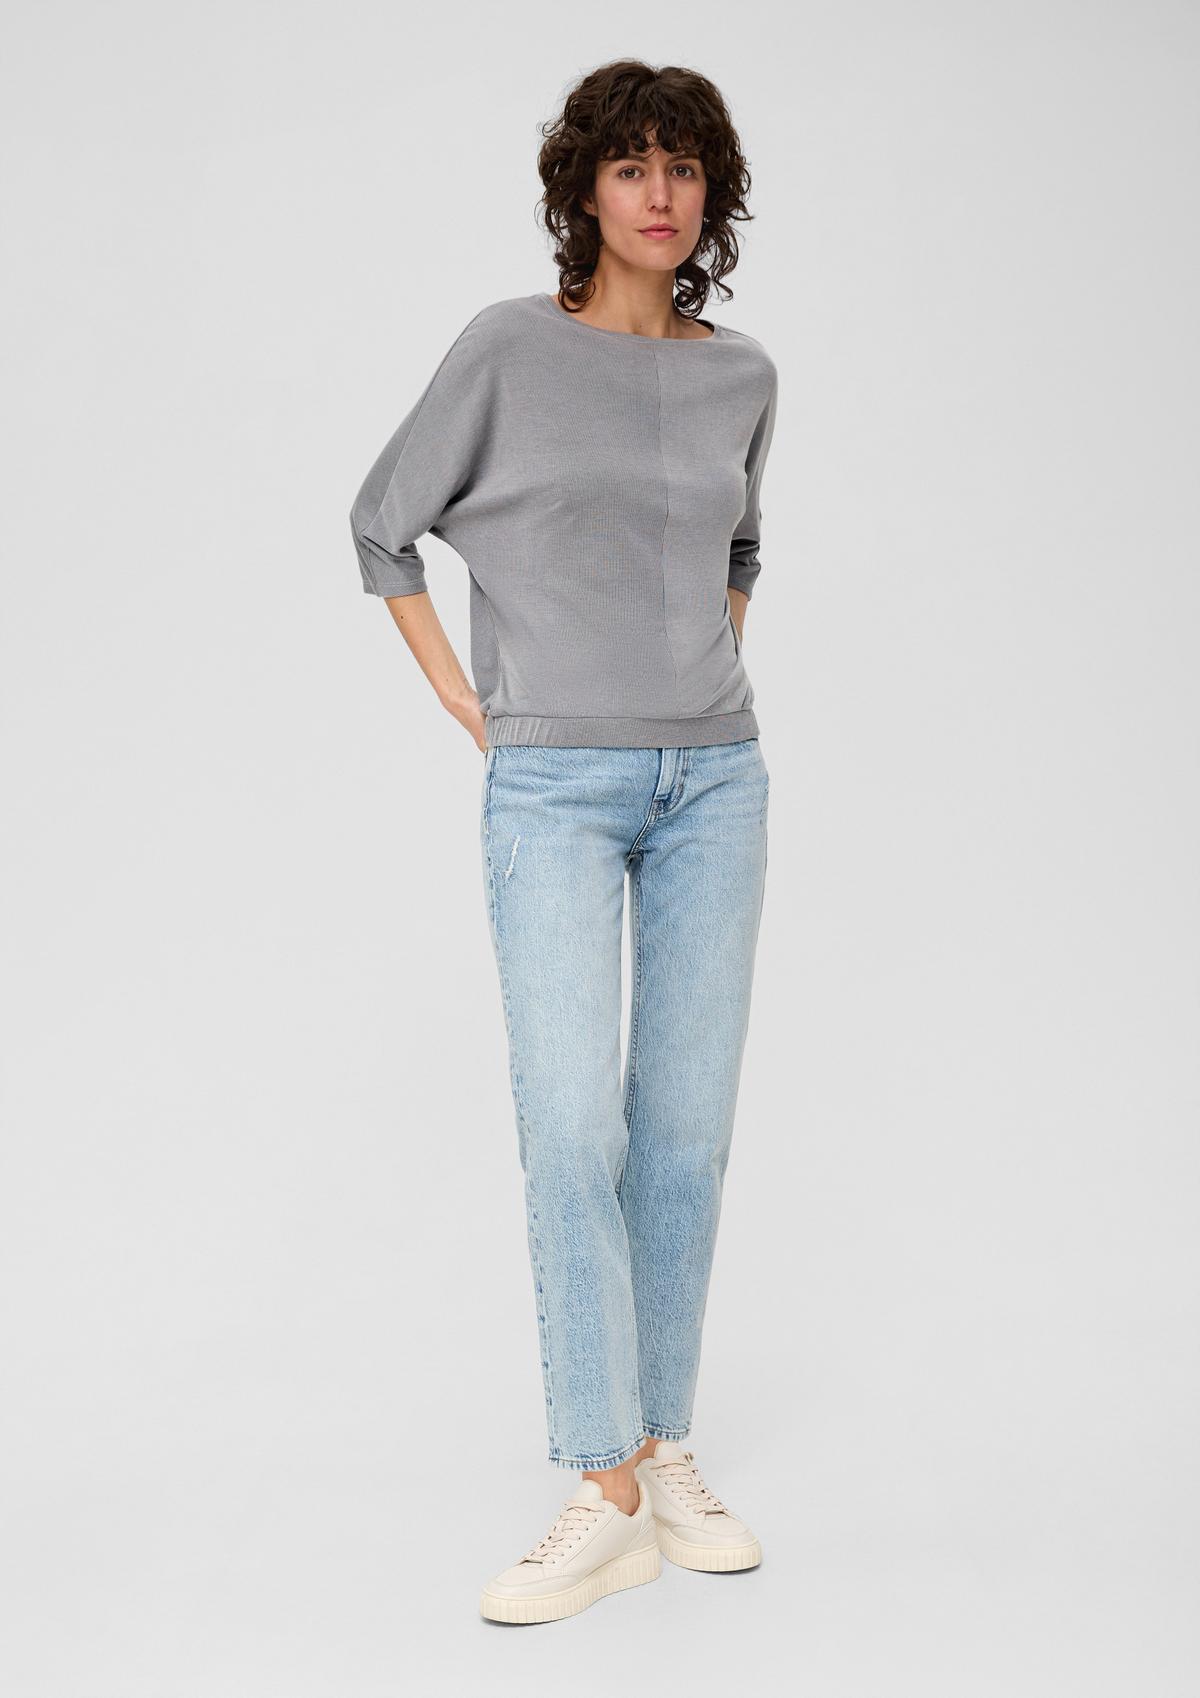 s.Oliver Ribbed long sleeve top in blended modal